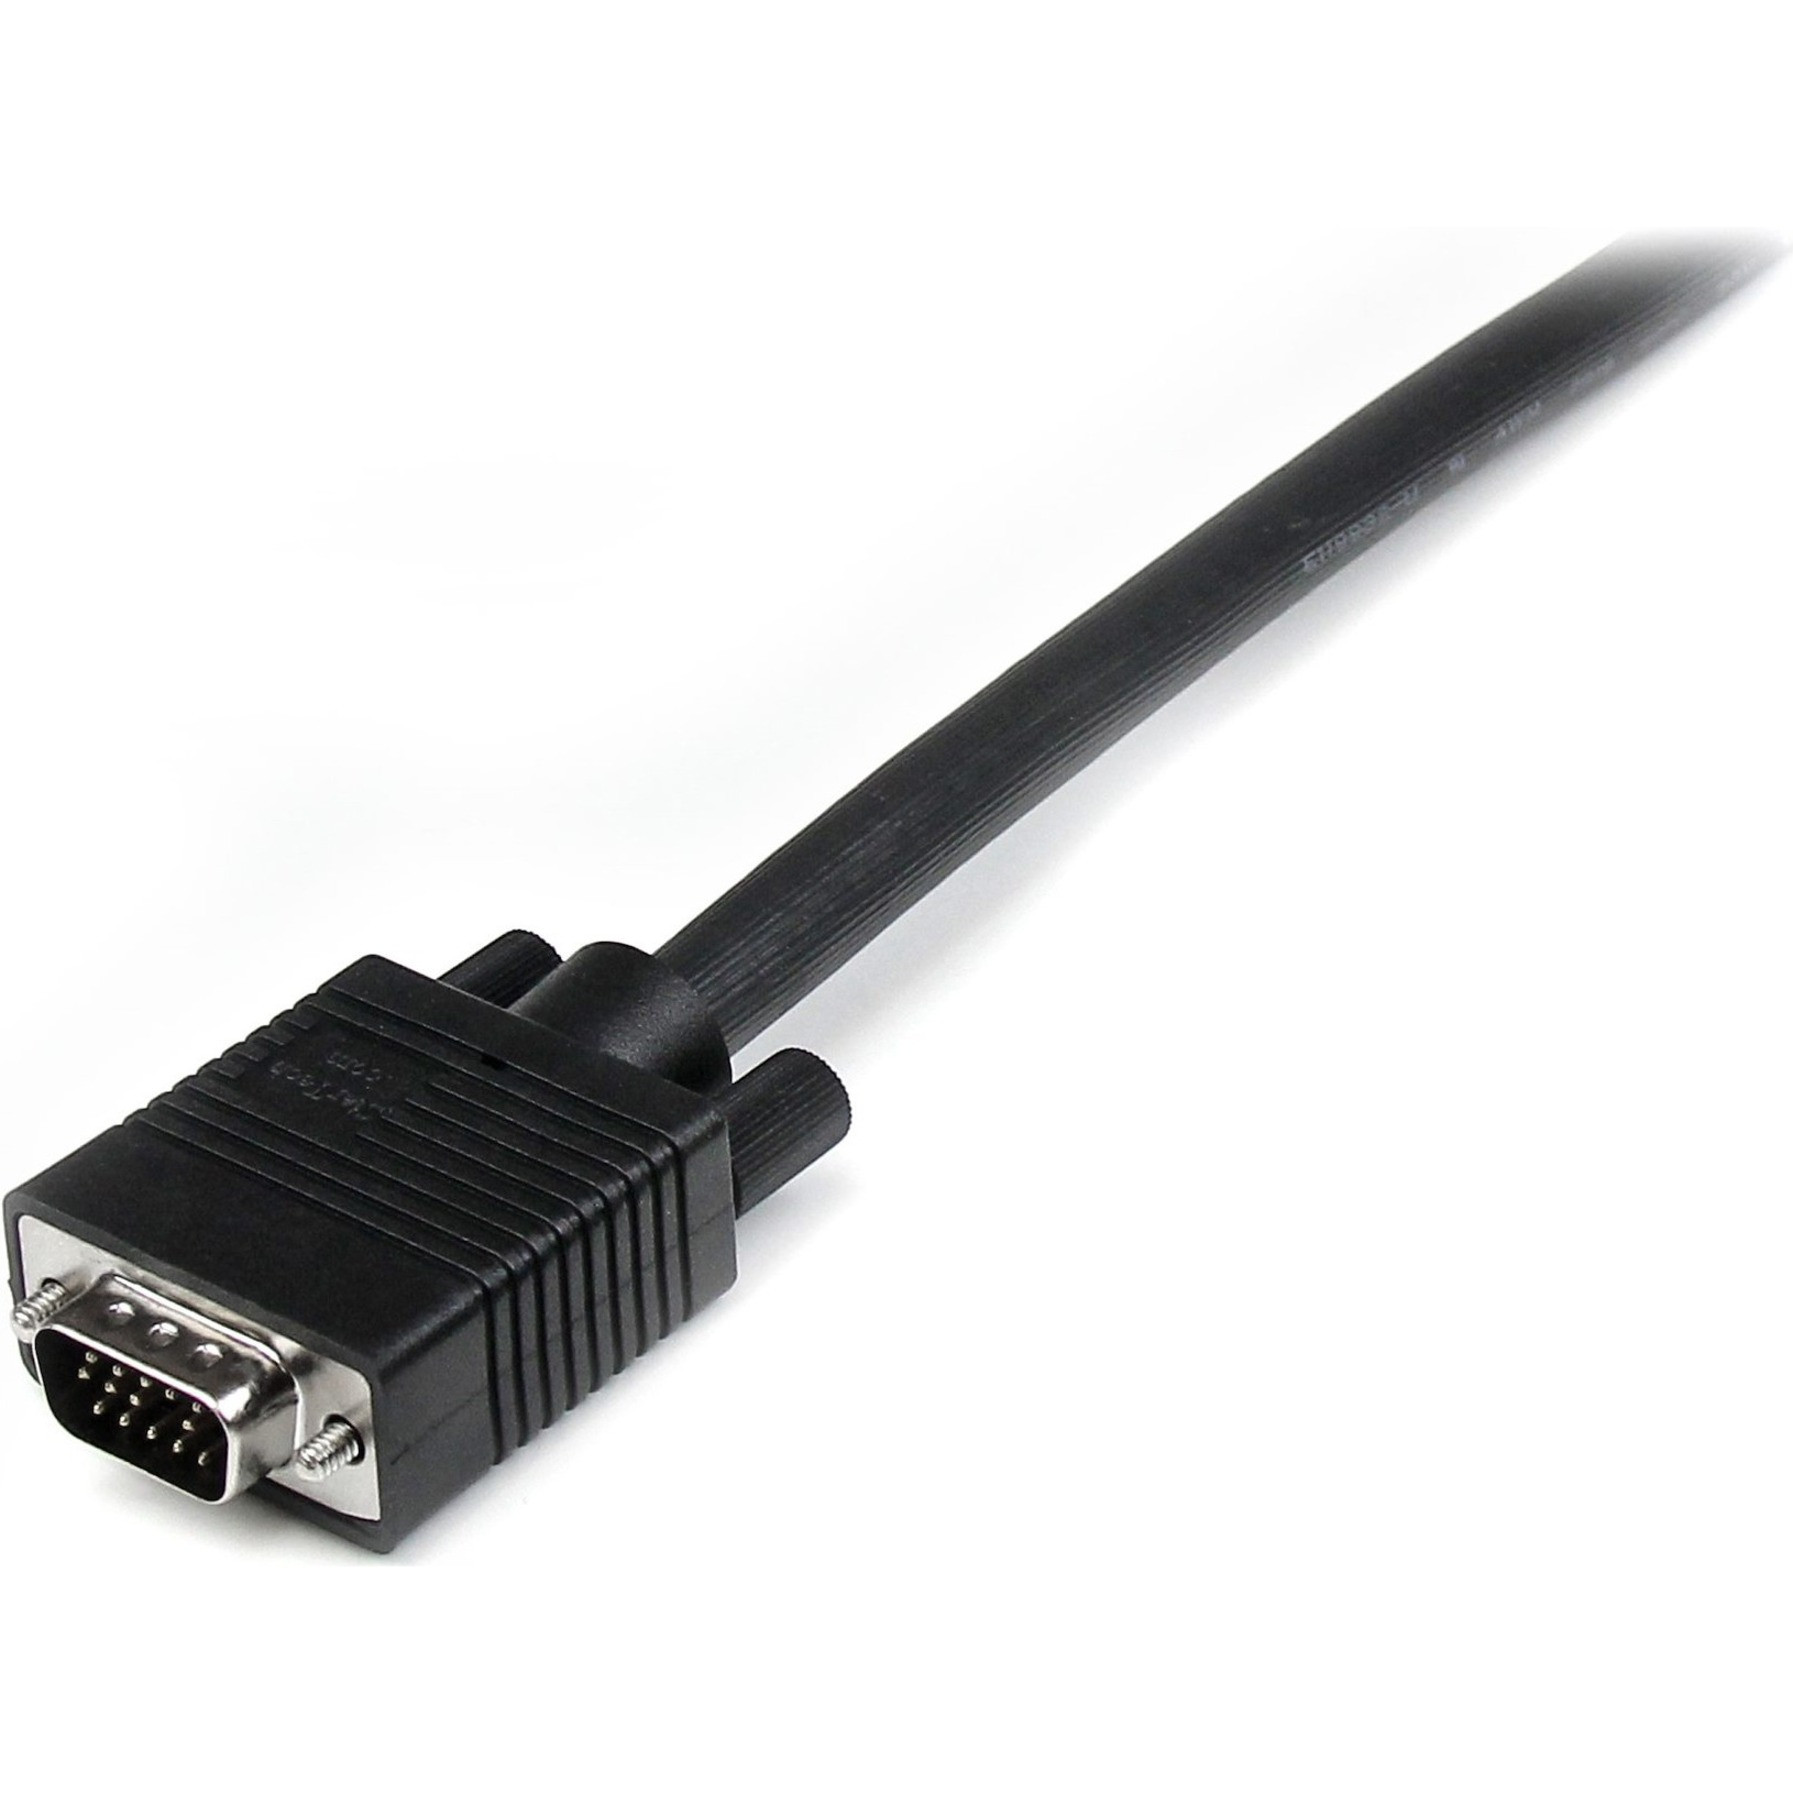 Startech .com 40 ft Coax High Resolution VGA Monitor CableHD15 M/MConnect your VGA monitor with the highest quality connection availab… MXT101MMHQ40